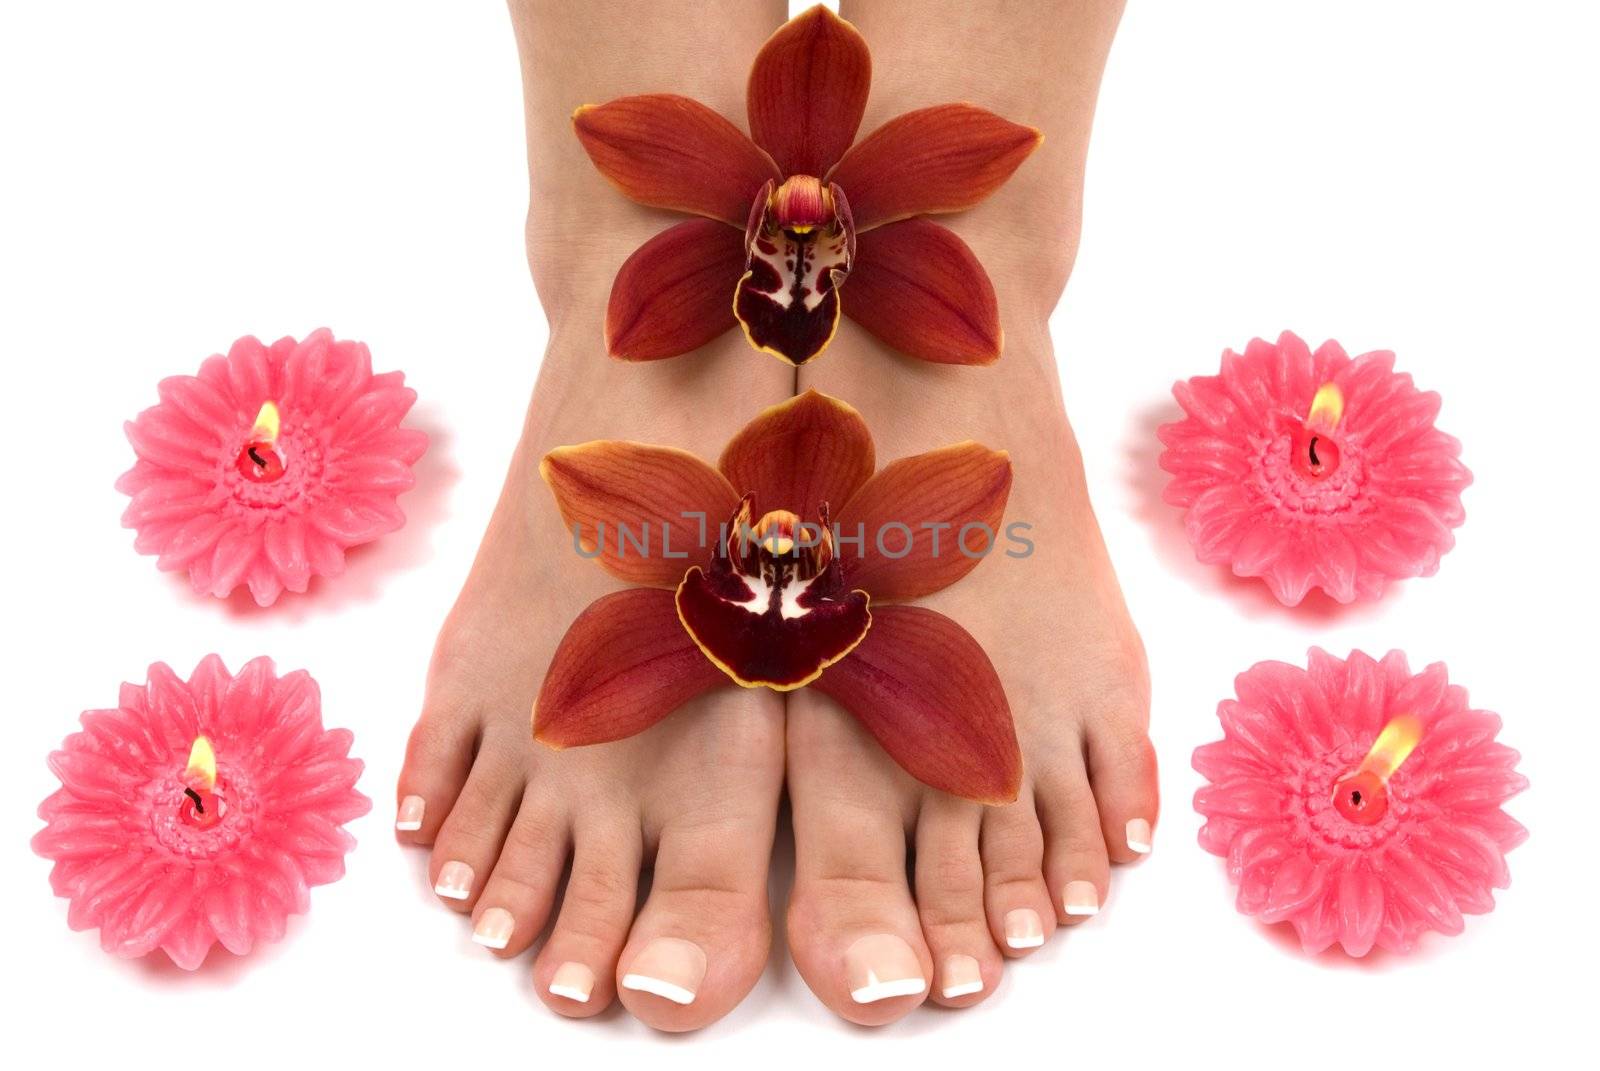 Feet with beautiful fresh orchids and candles